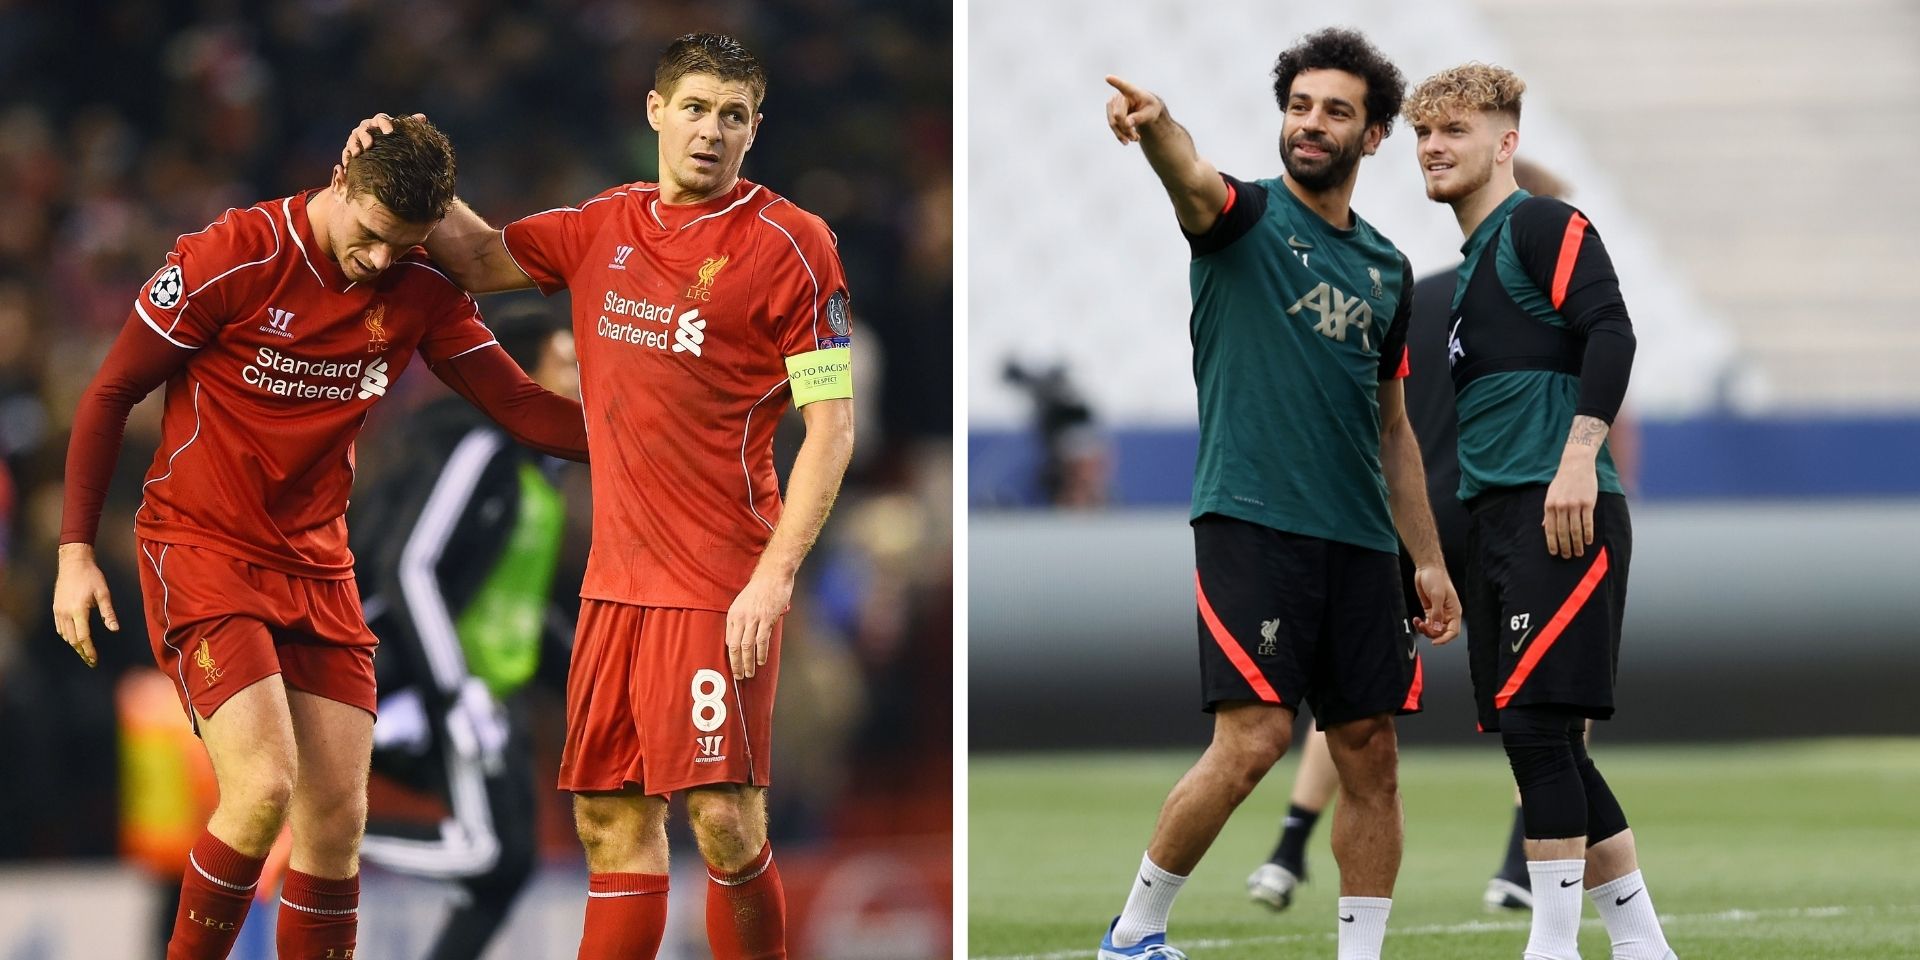 Ex-Red sees parallels with the relationship between Harvey Elliott and Mo Salah to Steven Gerrard and Jordan Henderson’s bond